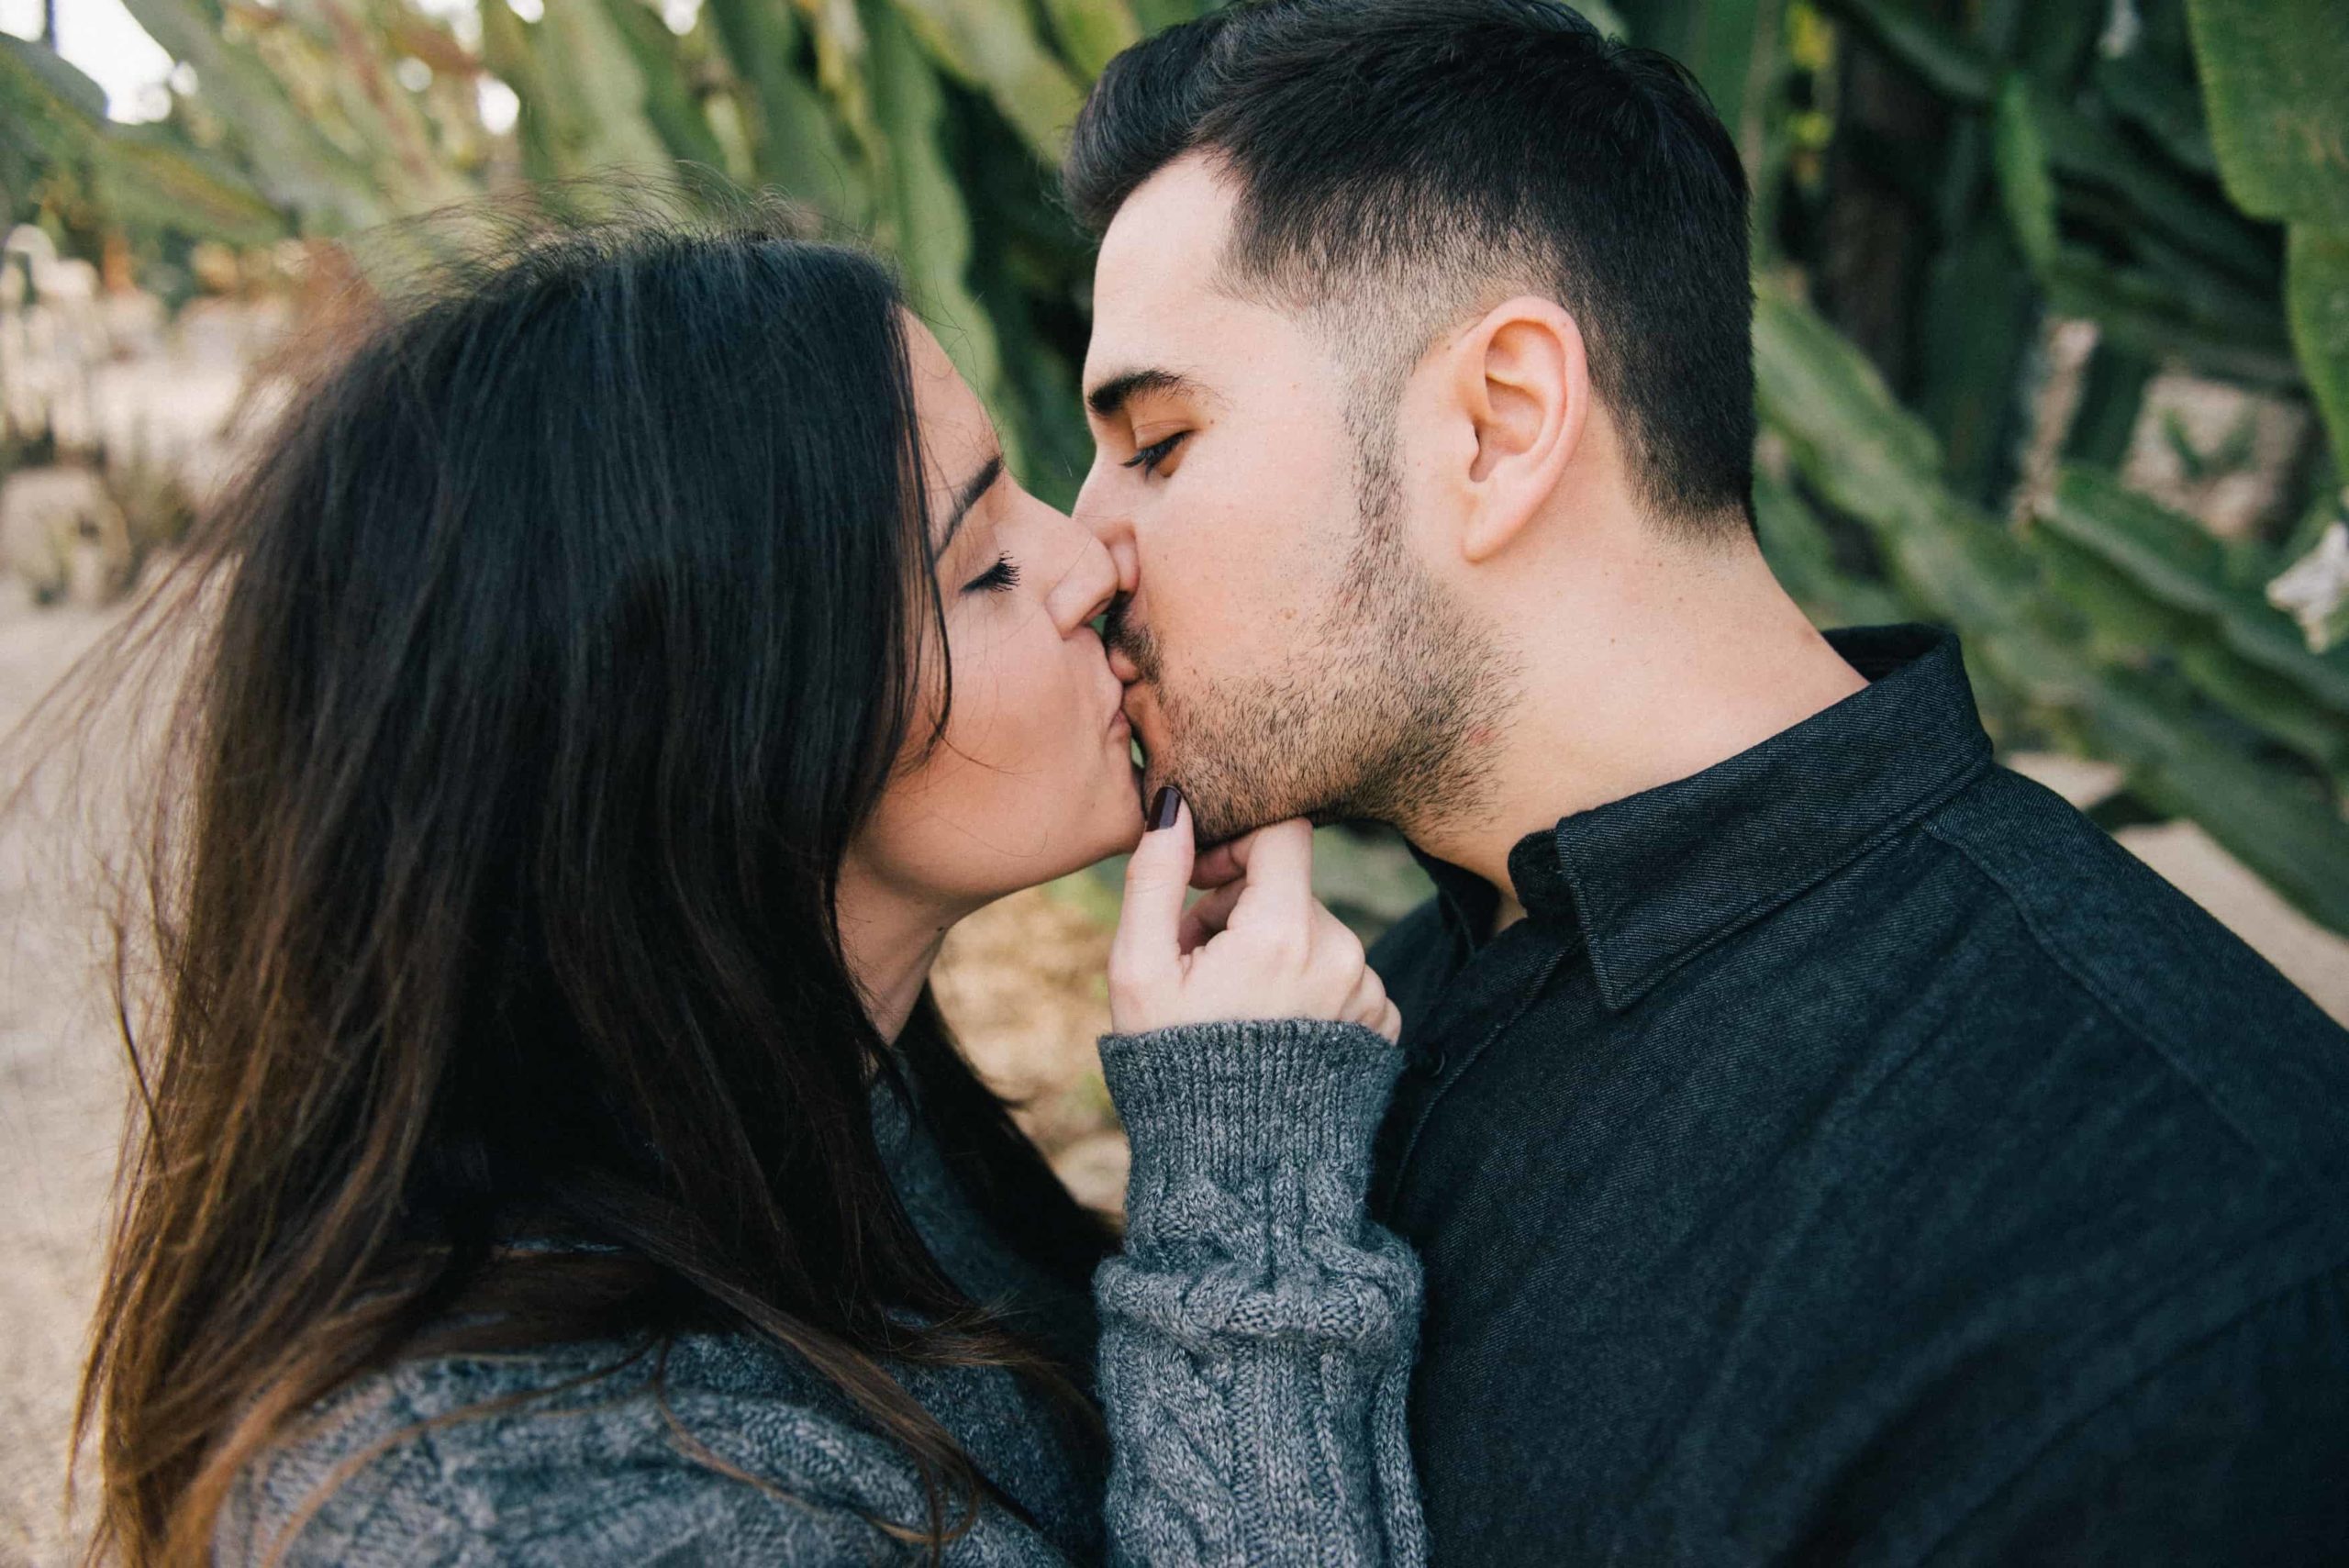 Should You Kiss On The First Date?